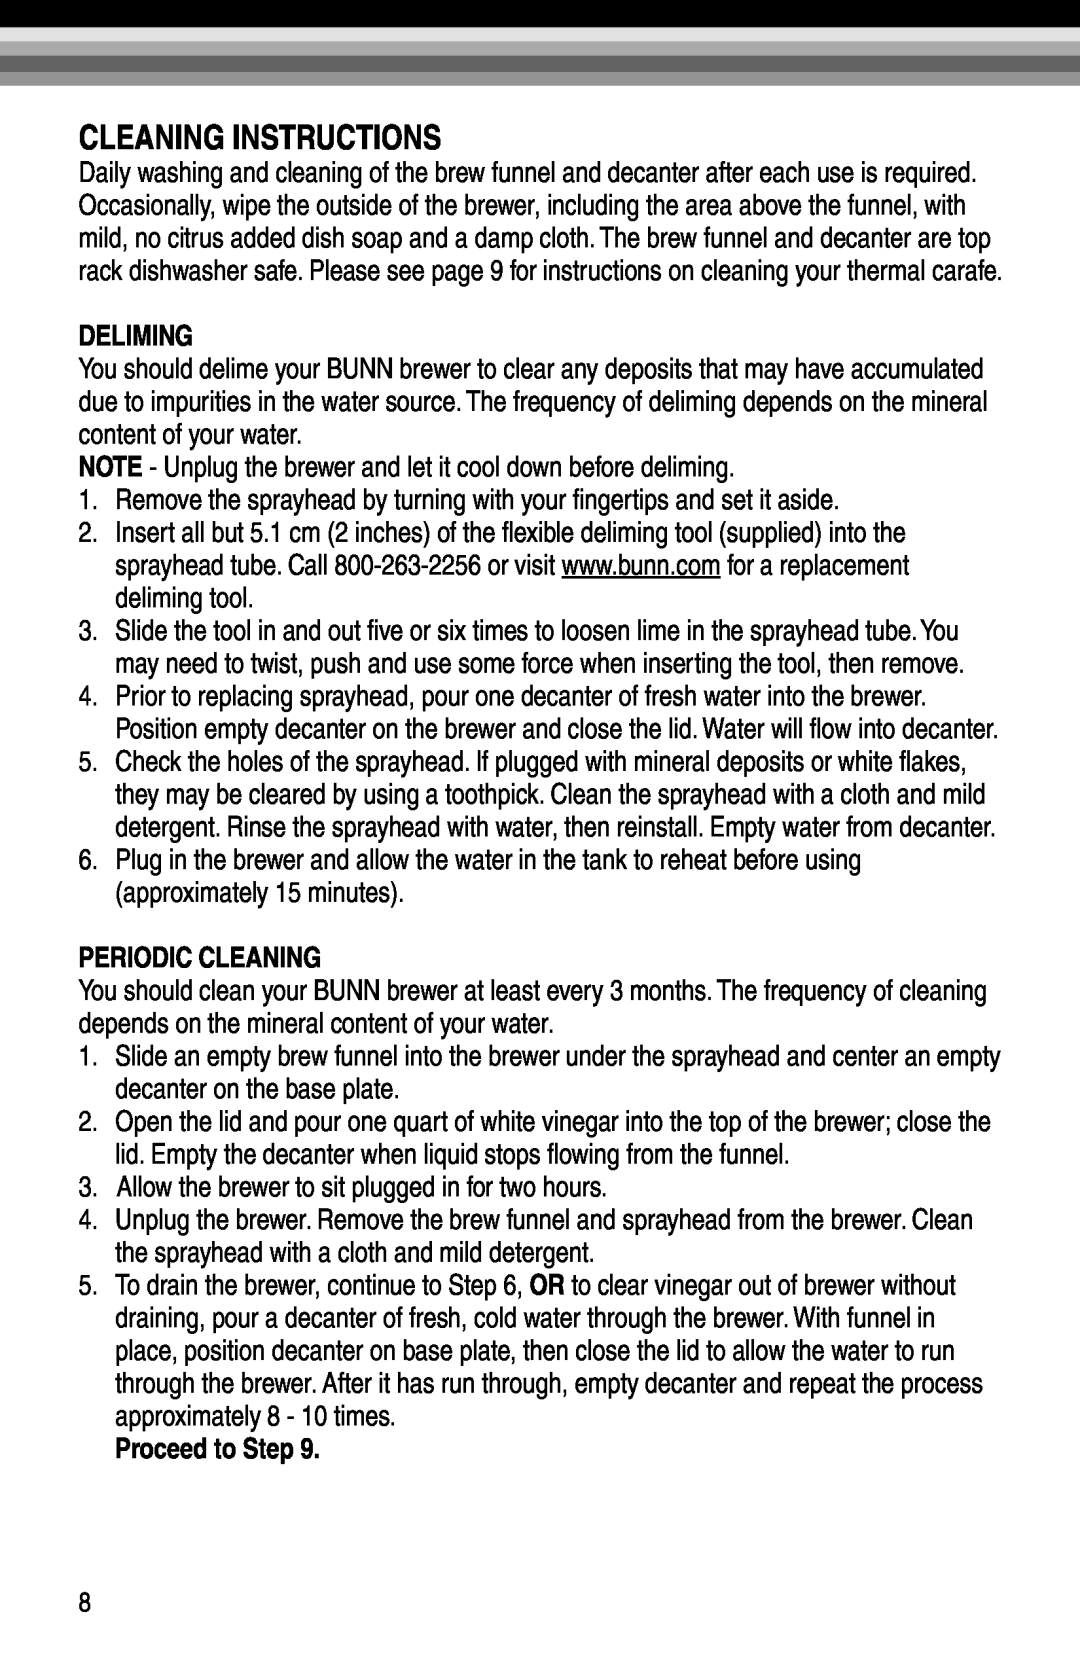 Bunn BX-W, GRX-B, GRX-W, BX-B manual Cleaning Instructions, Deliming, Periodic Cleaning, Proceed to Step 